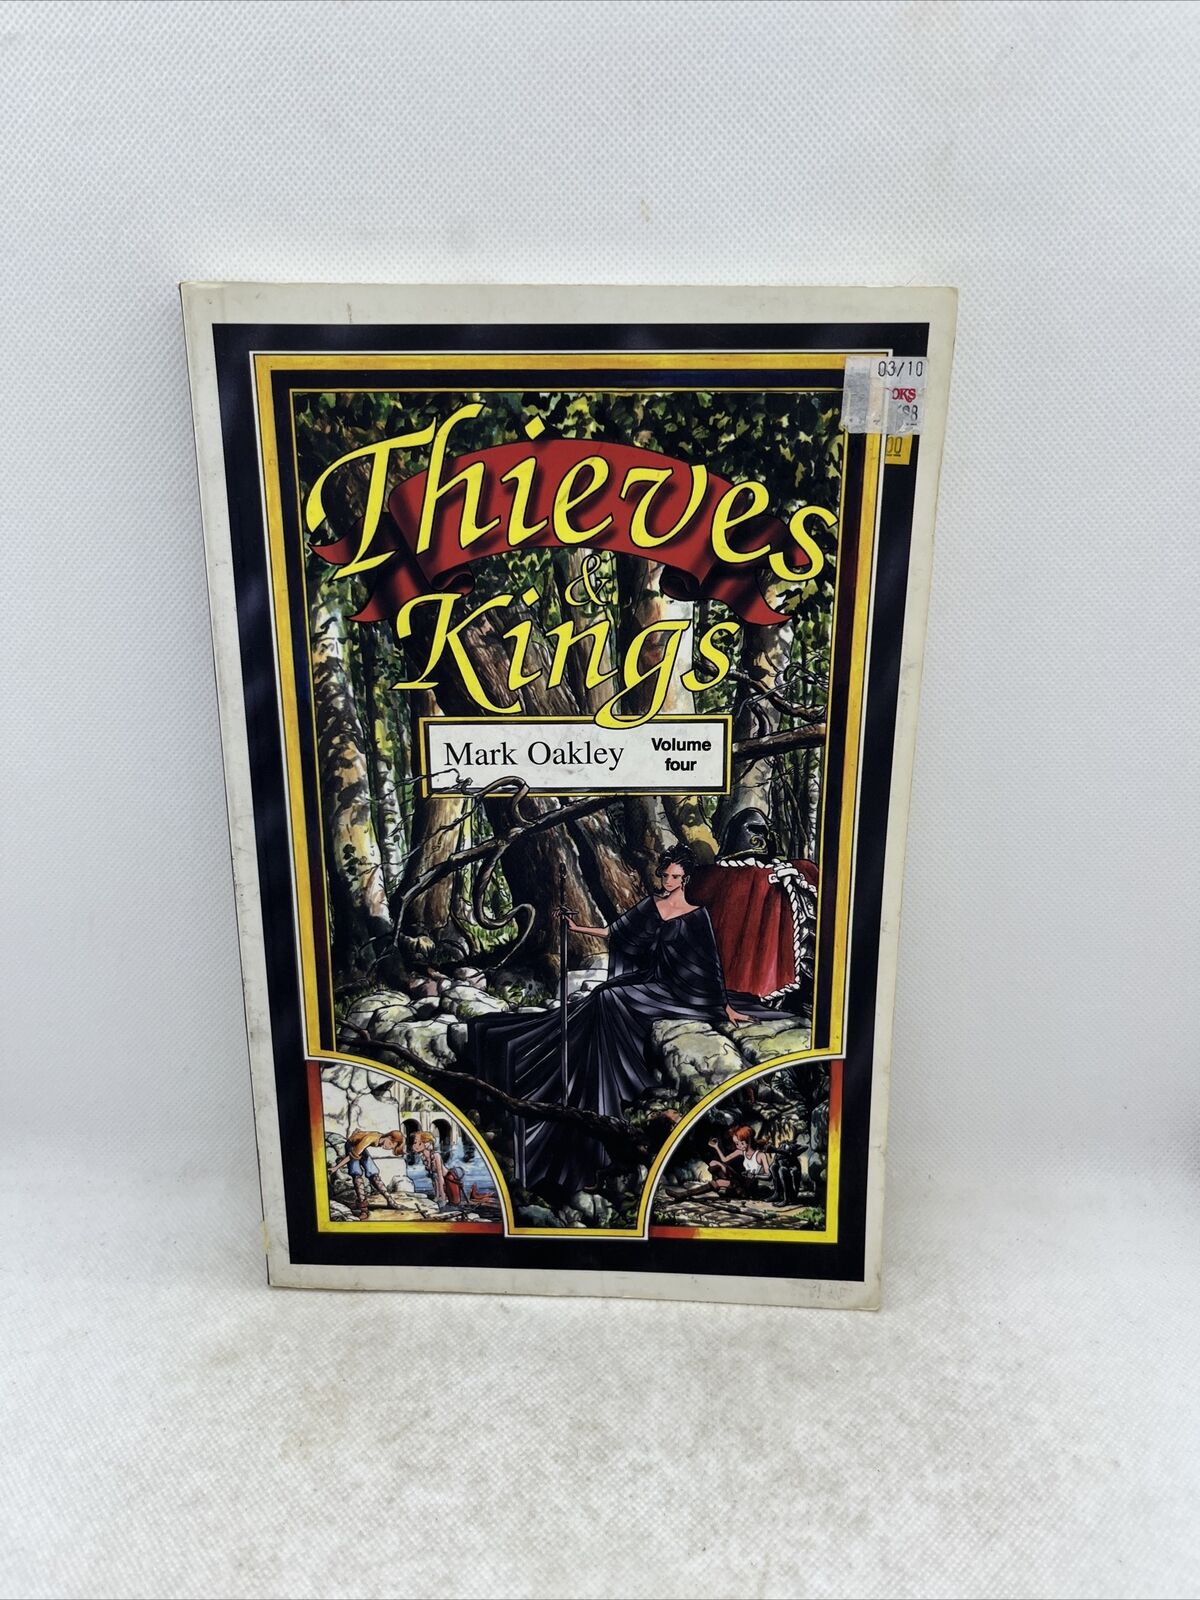 THIEVES & KINGS VOLUME FOUR, THE SHADOW BOOK By Mark Oakley Graphic Novel